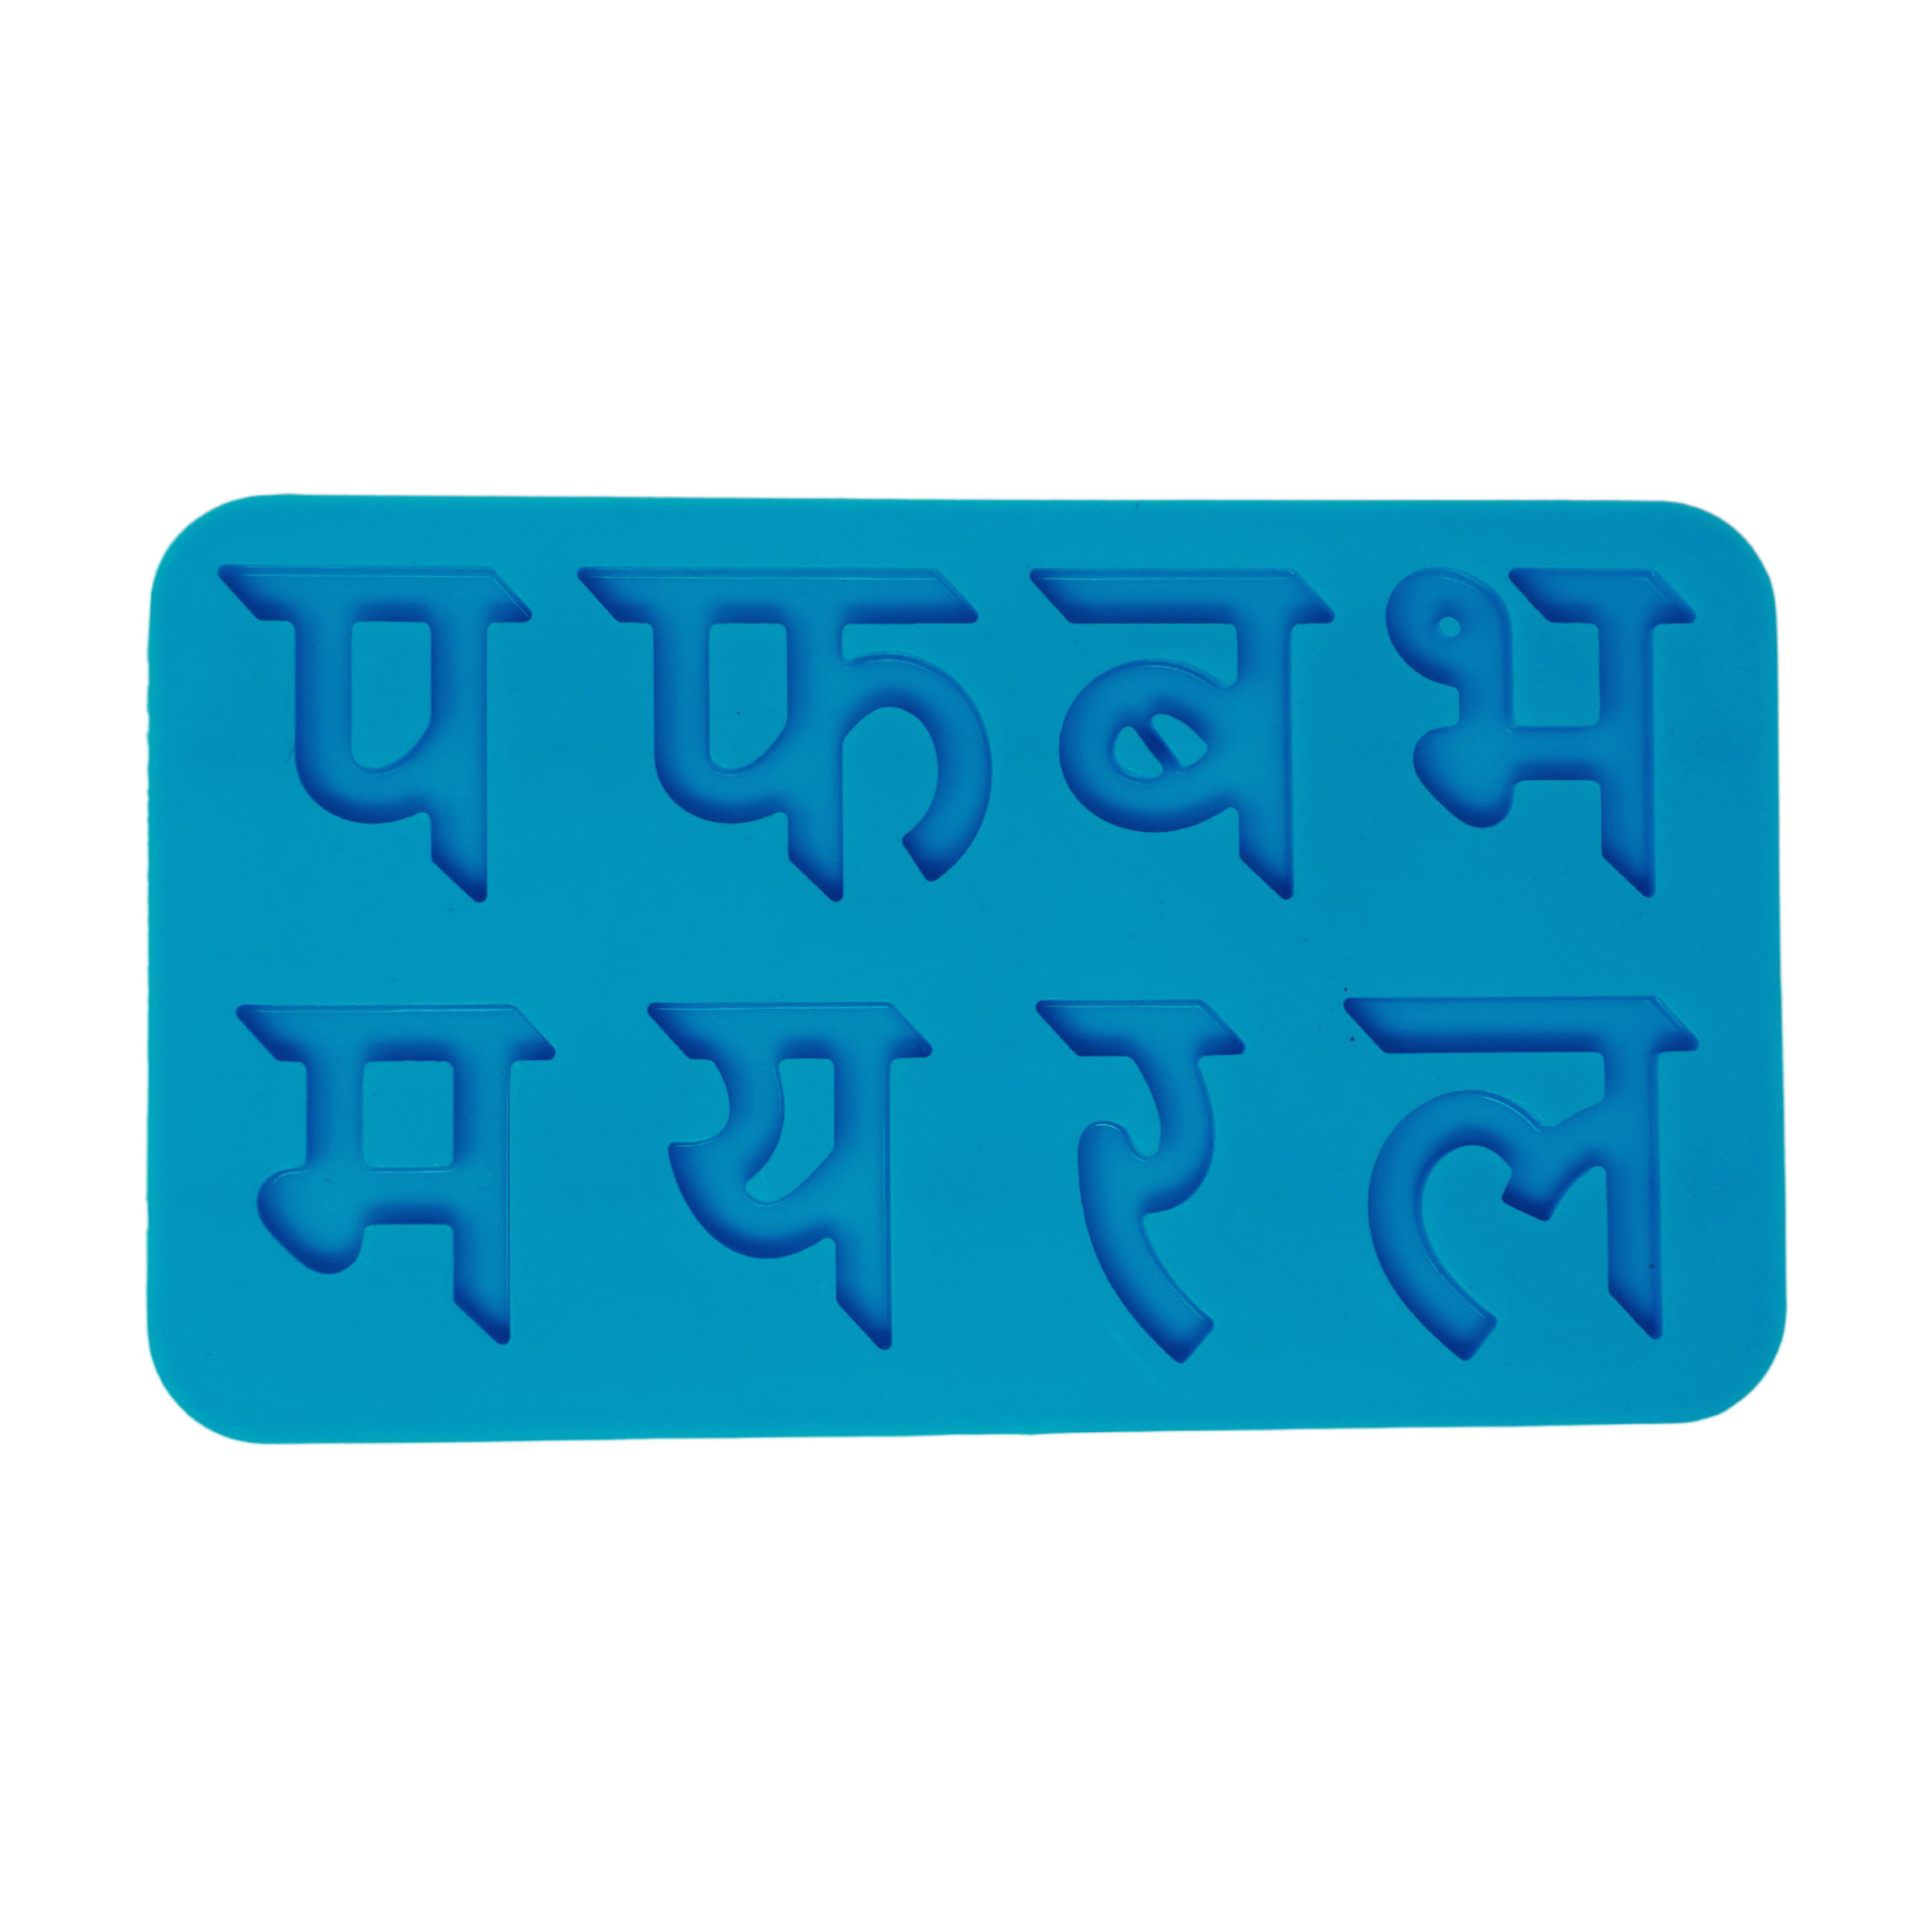 Hindi Alphabets Mould 4 - Fuh - The Mould Story